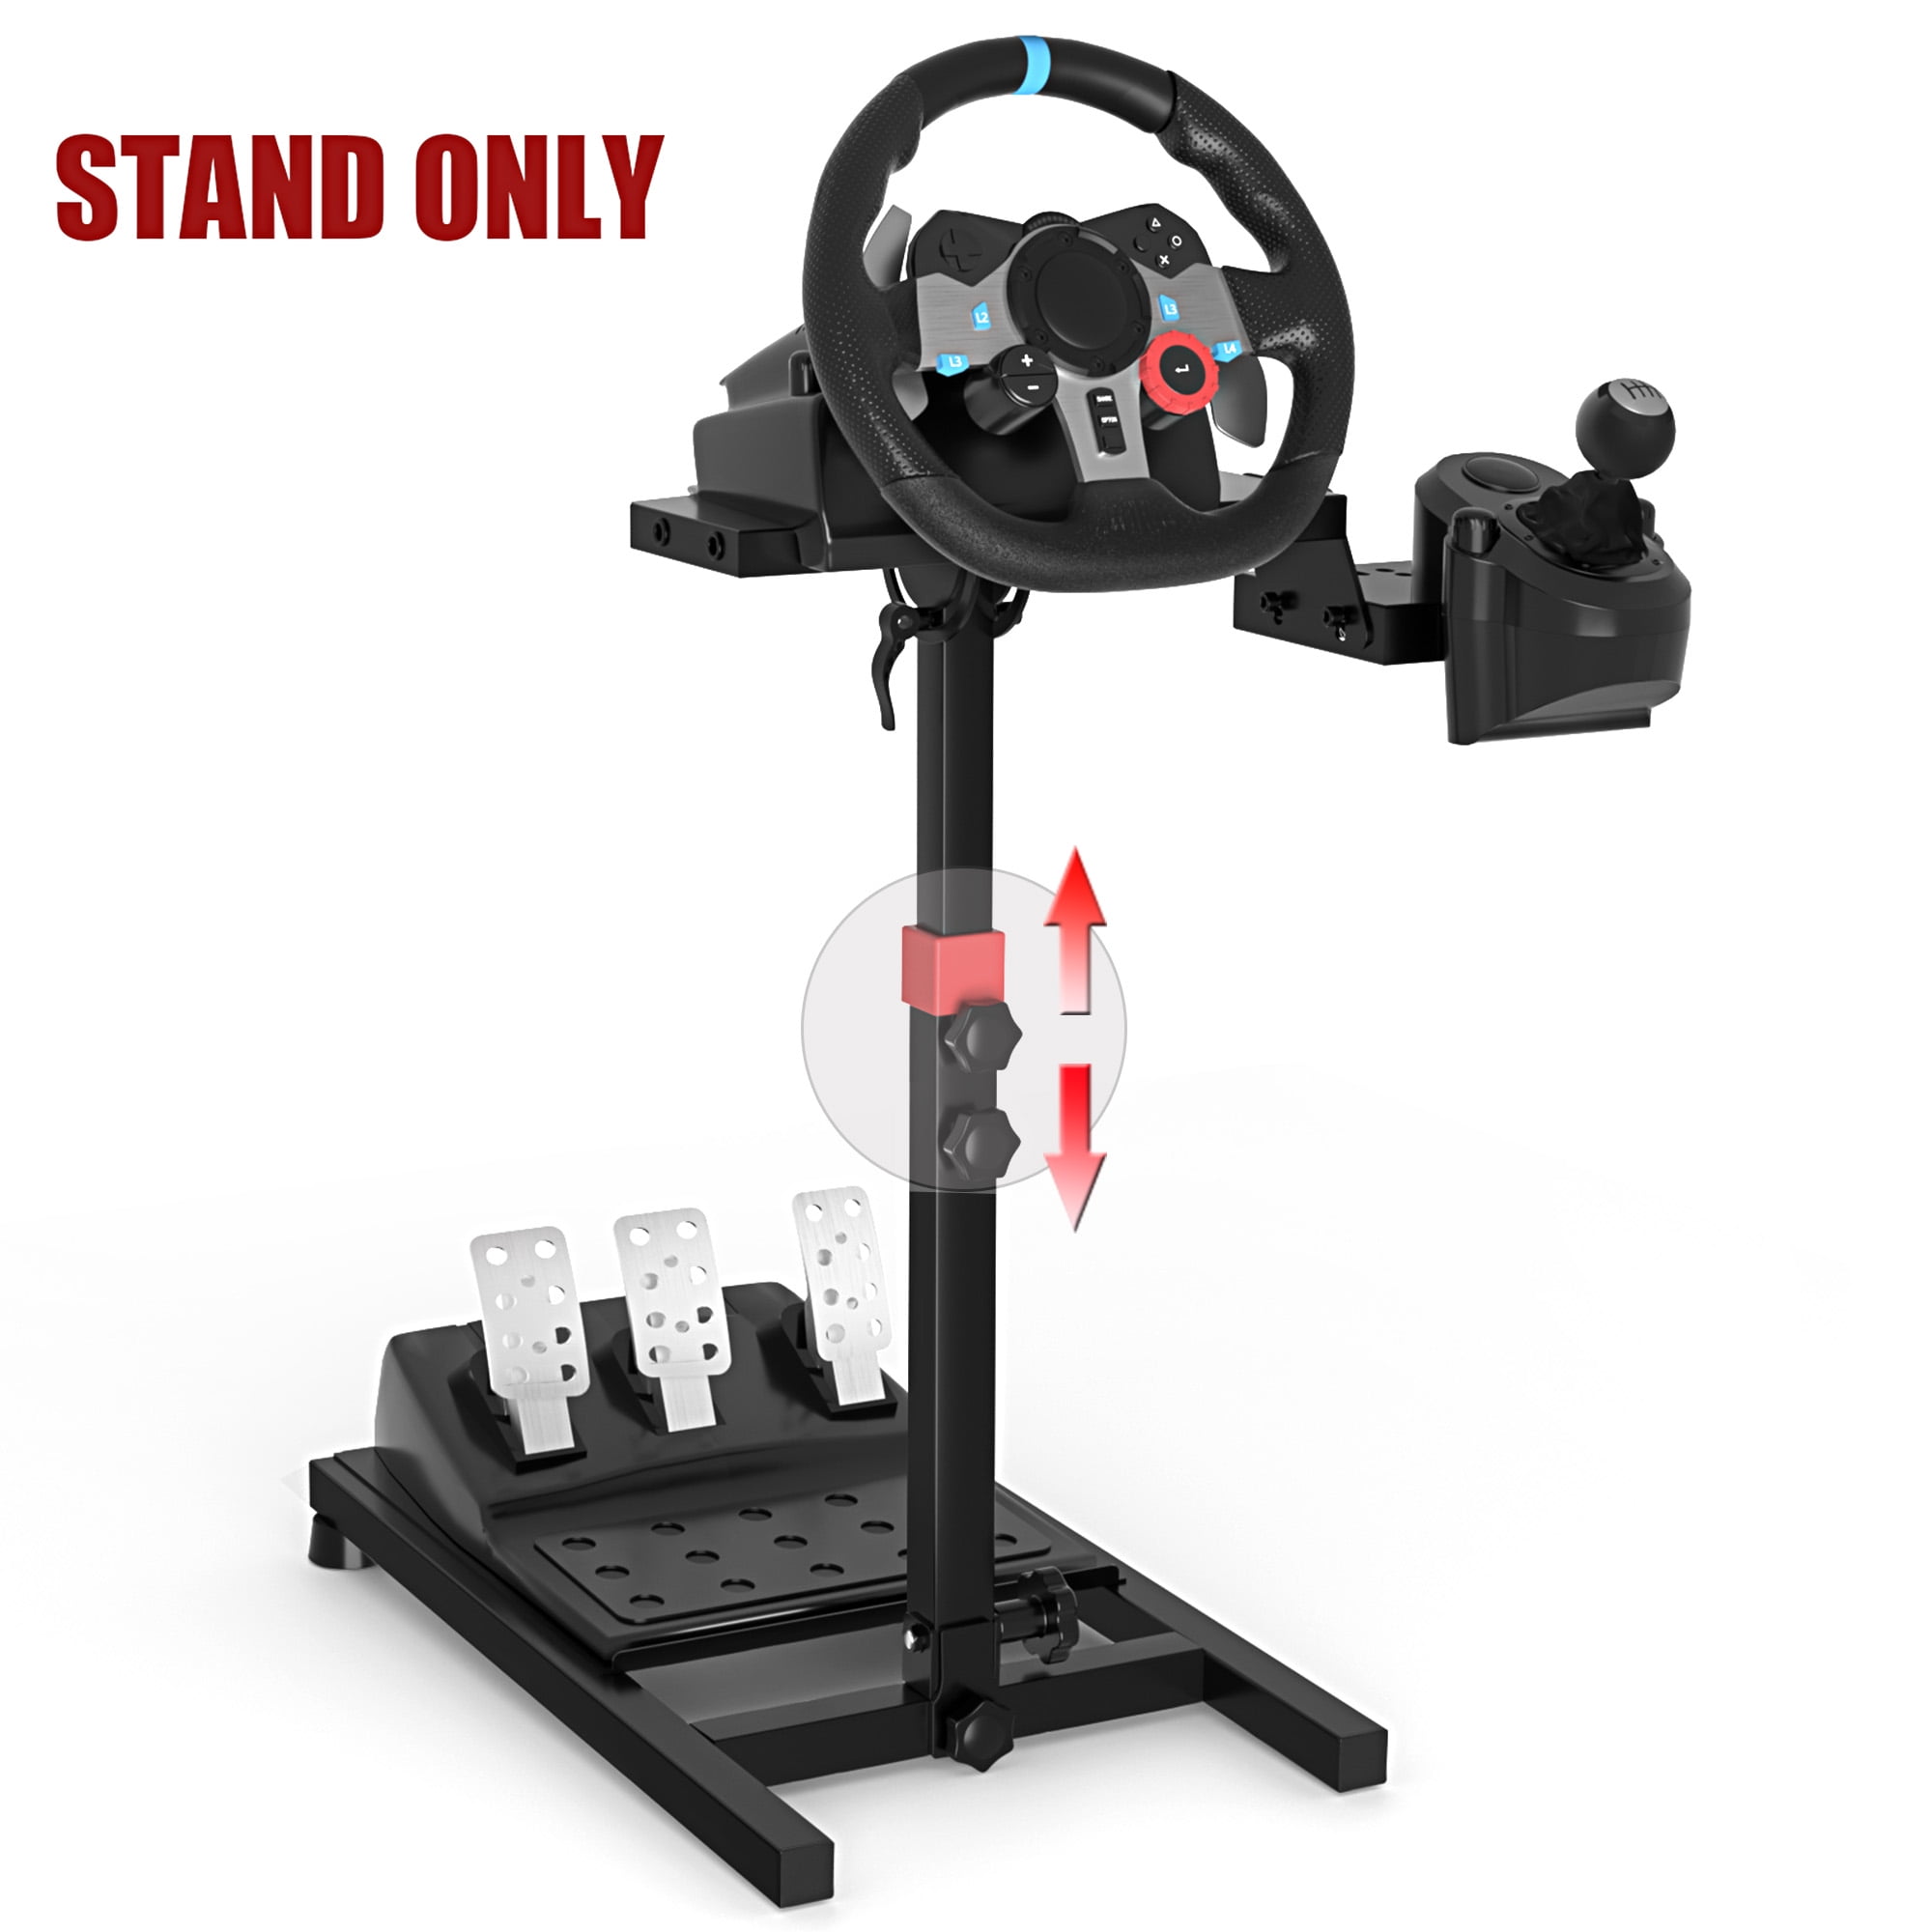 Racing Wheel Stand, Height Adjustable & Foldable Steering Wheal Stand  Compatible with Logitech G25,G27,G29,G920 Gaming Cockpit